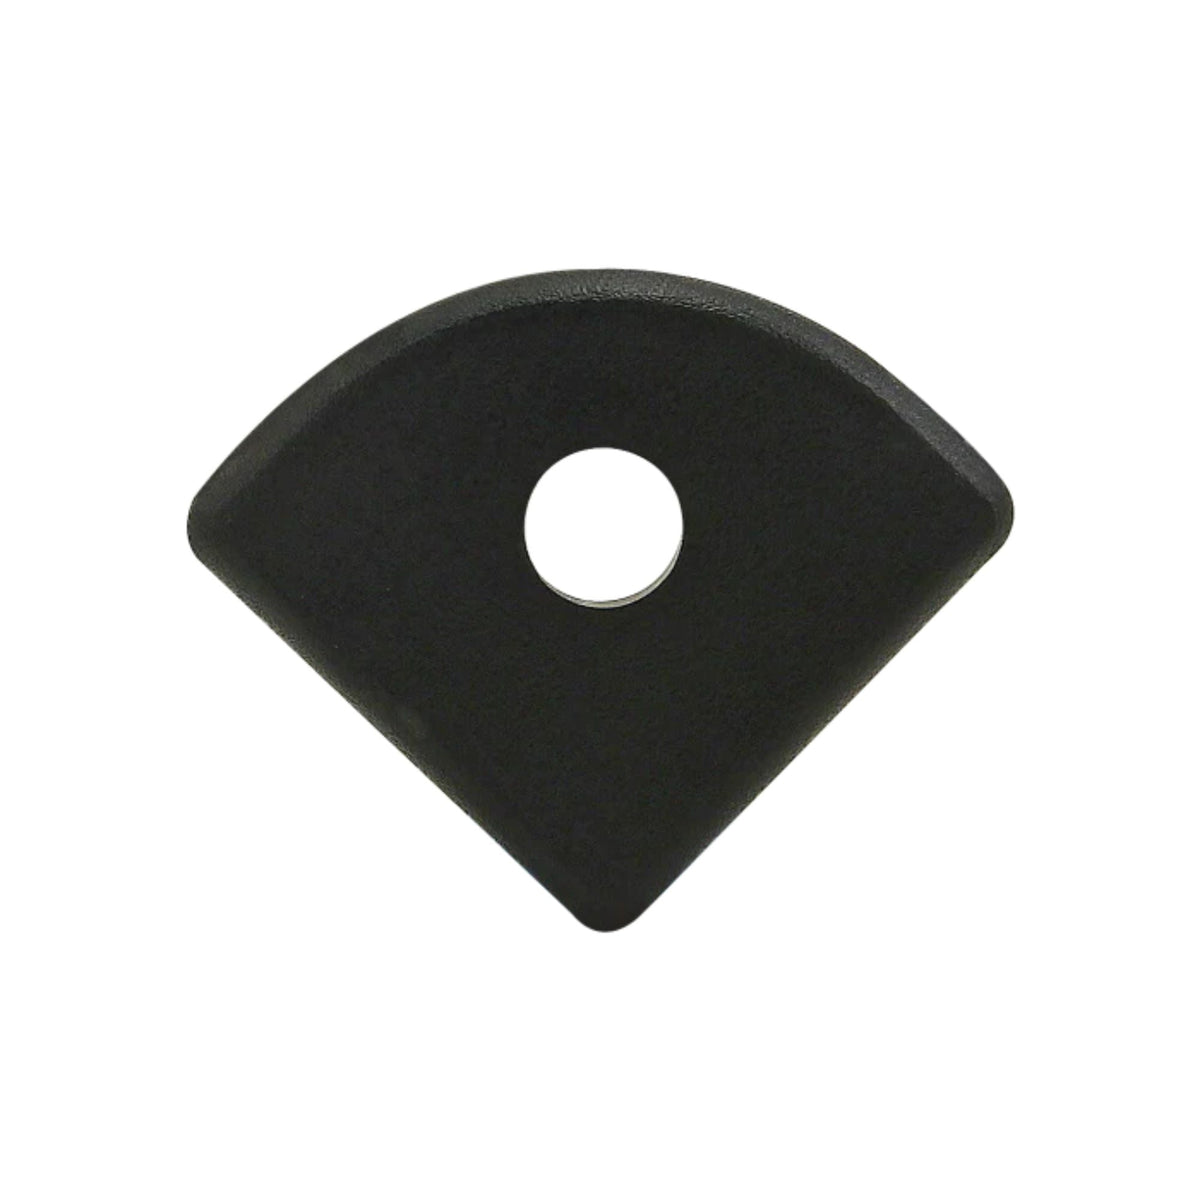 black end cap with two straight sides and a rounded top, with a hole in the center